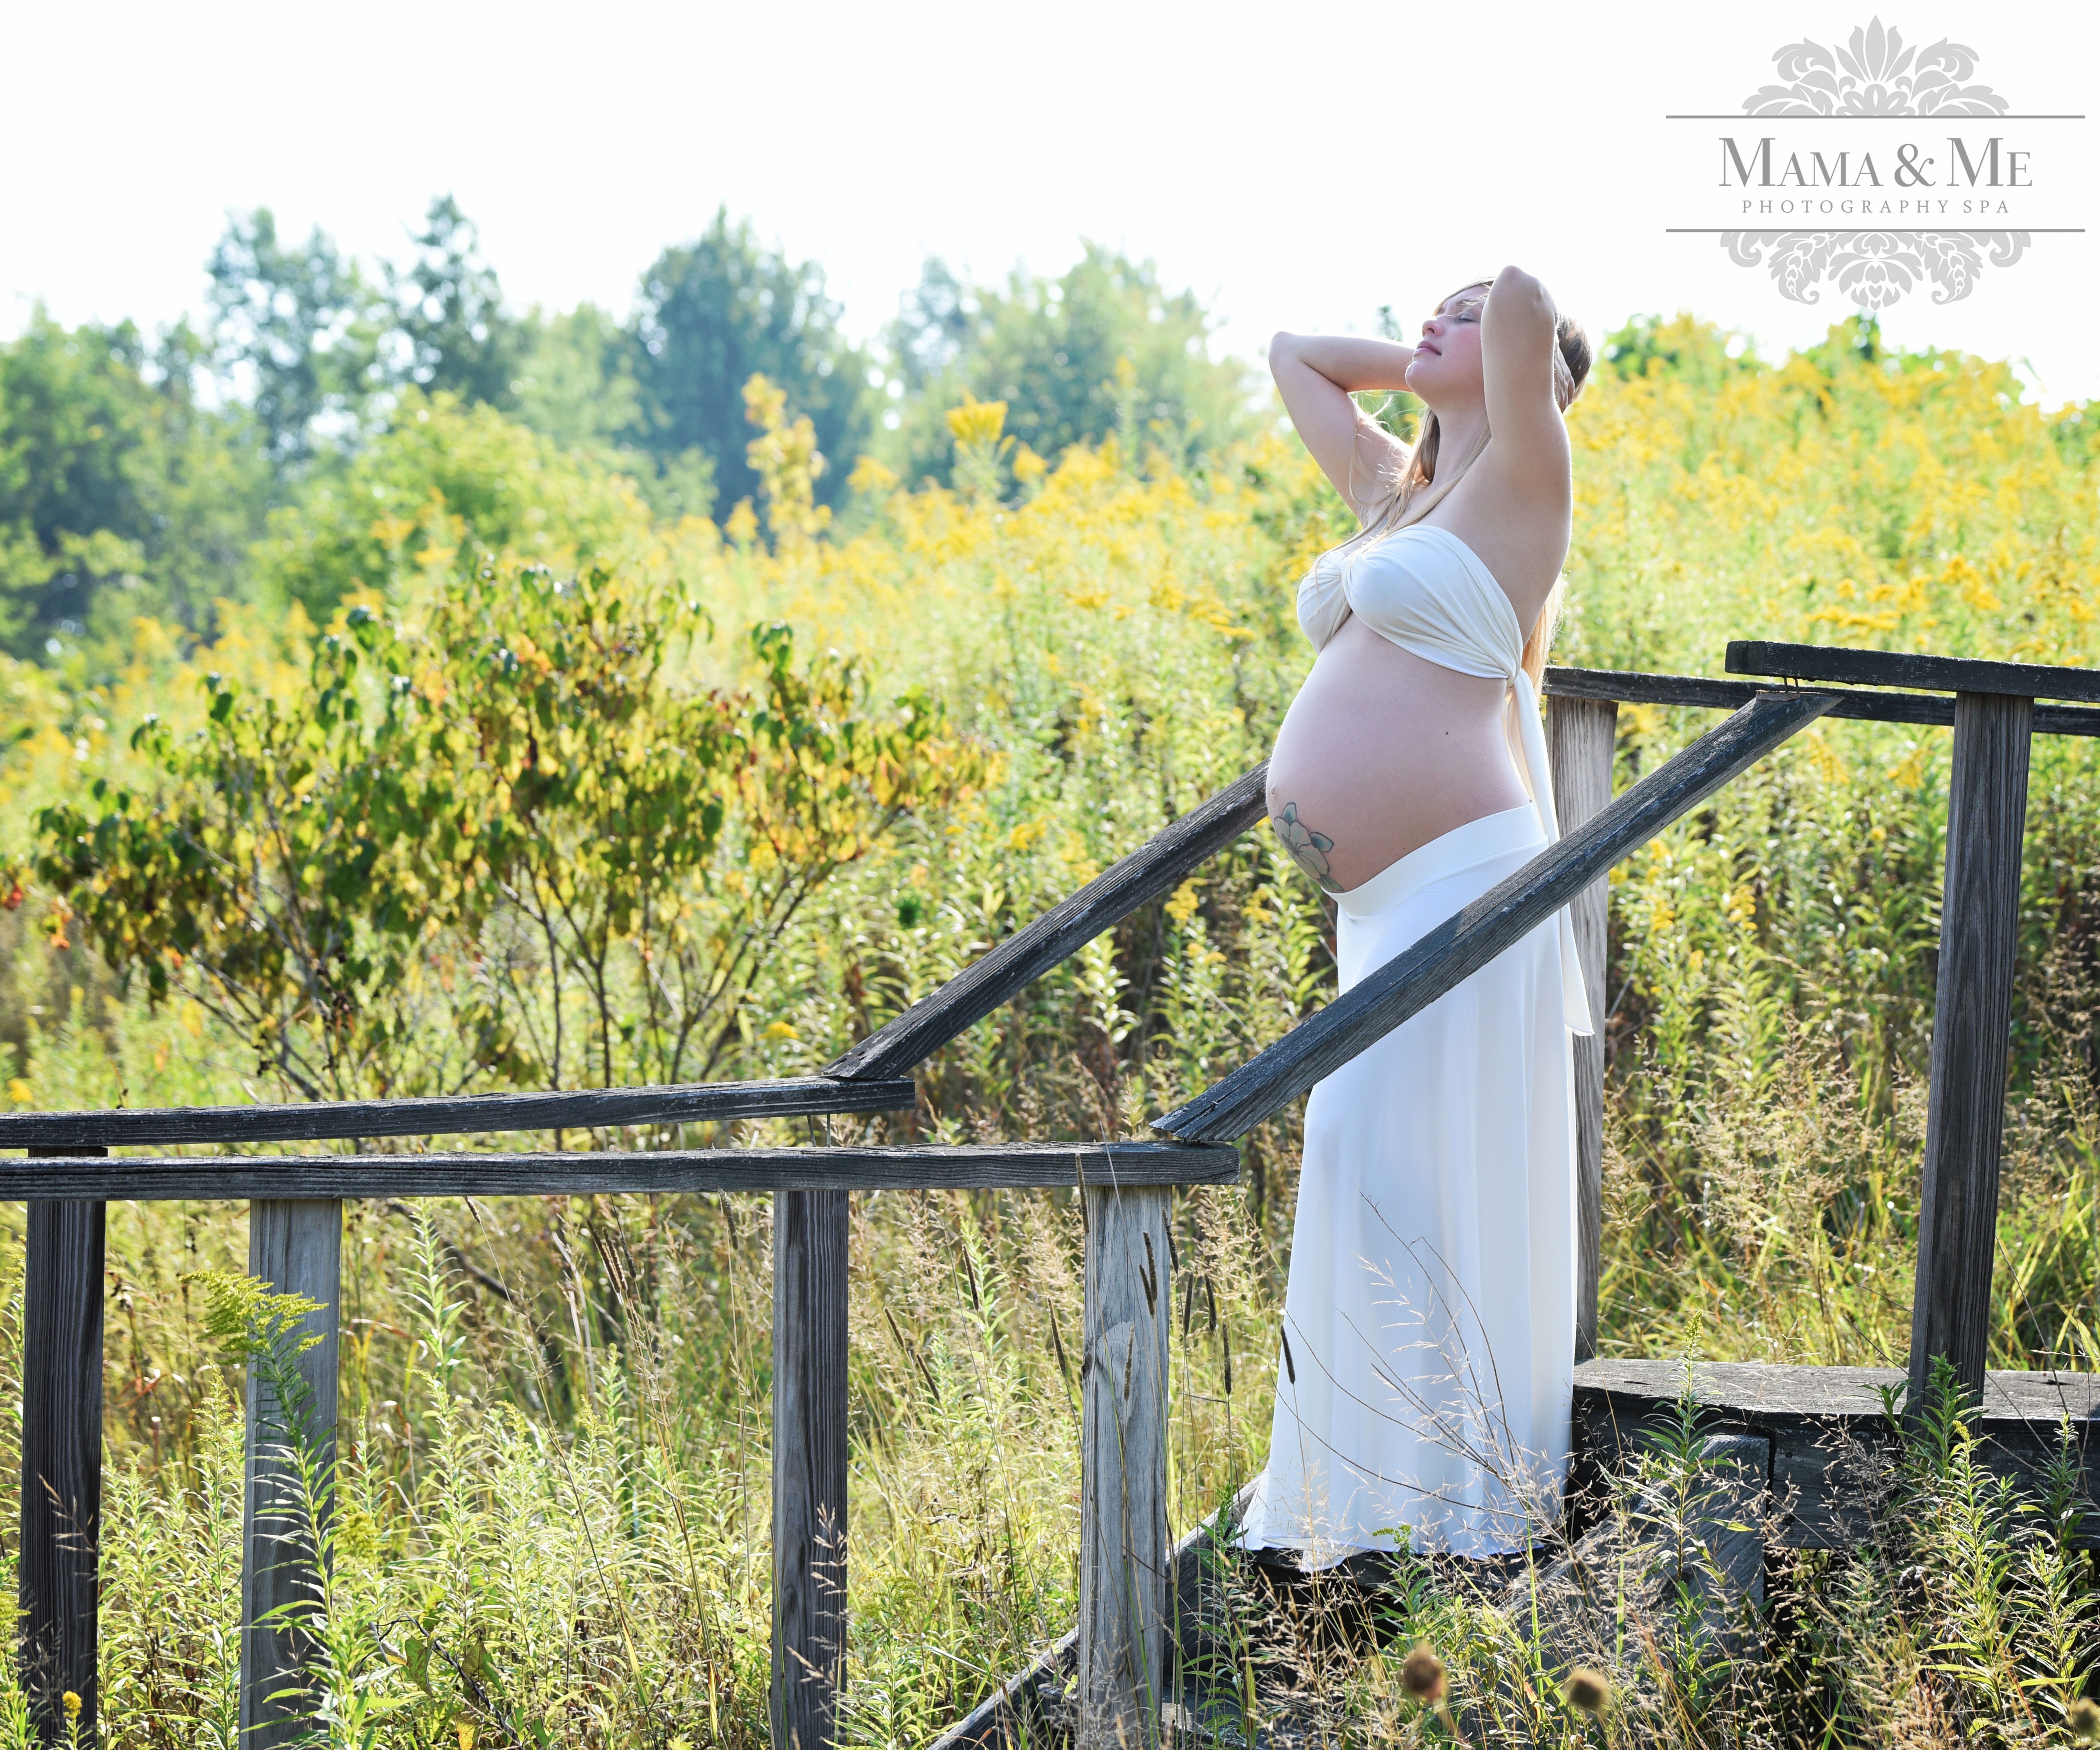 10_mama-and-me-photography-spa-watermarked